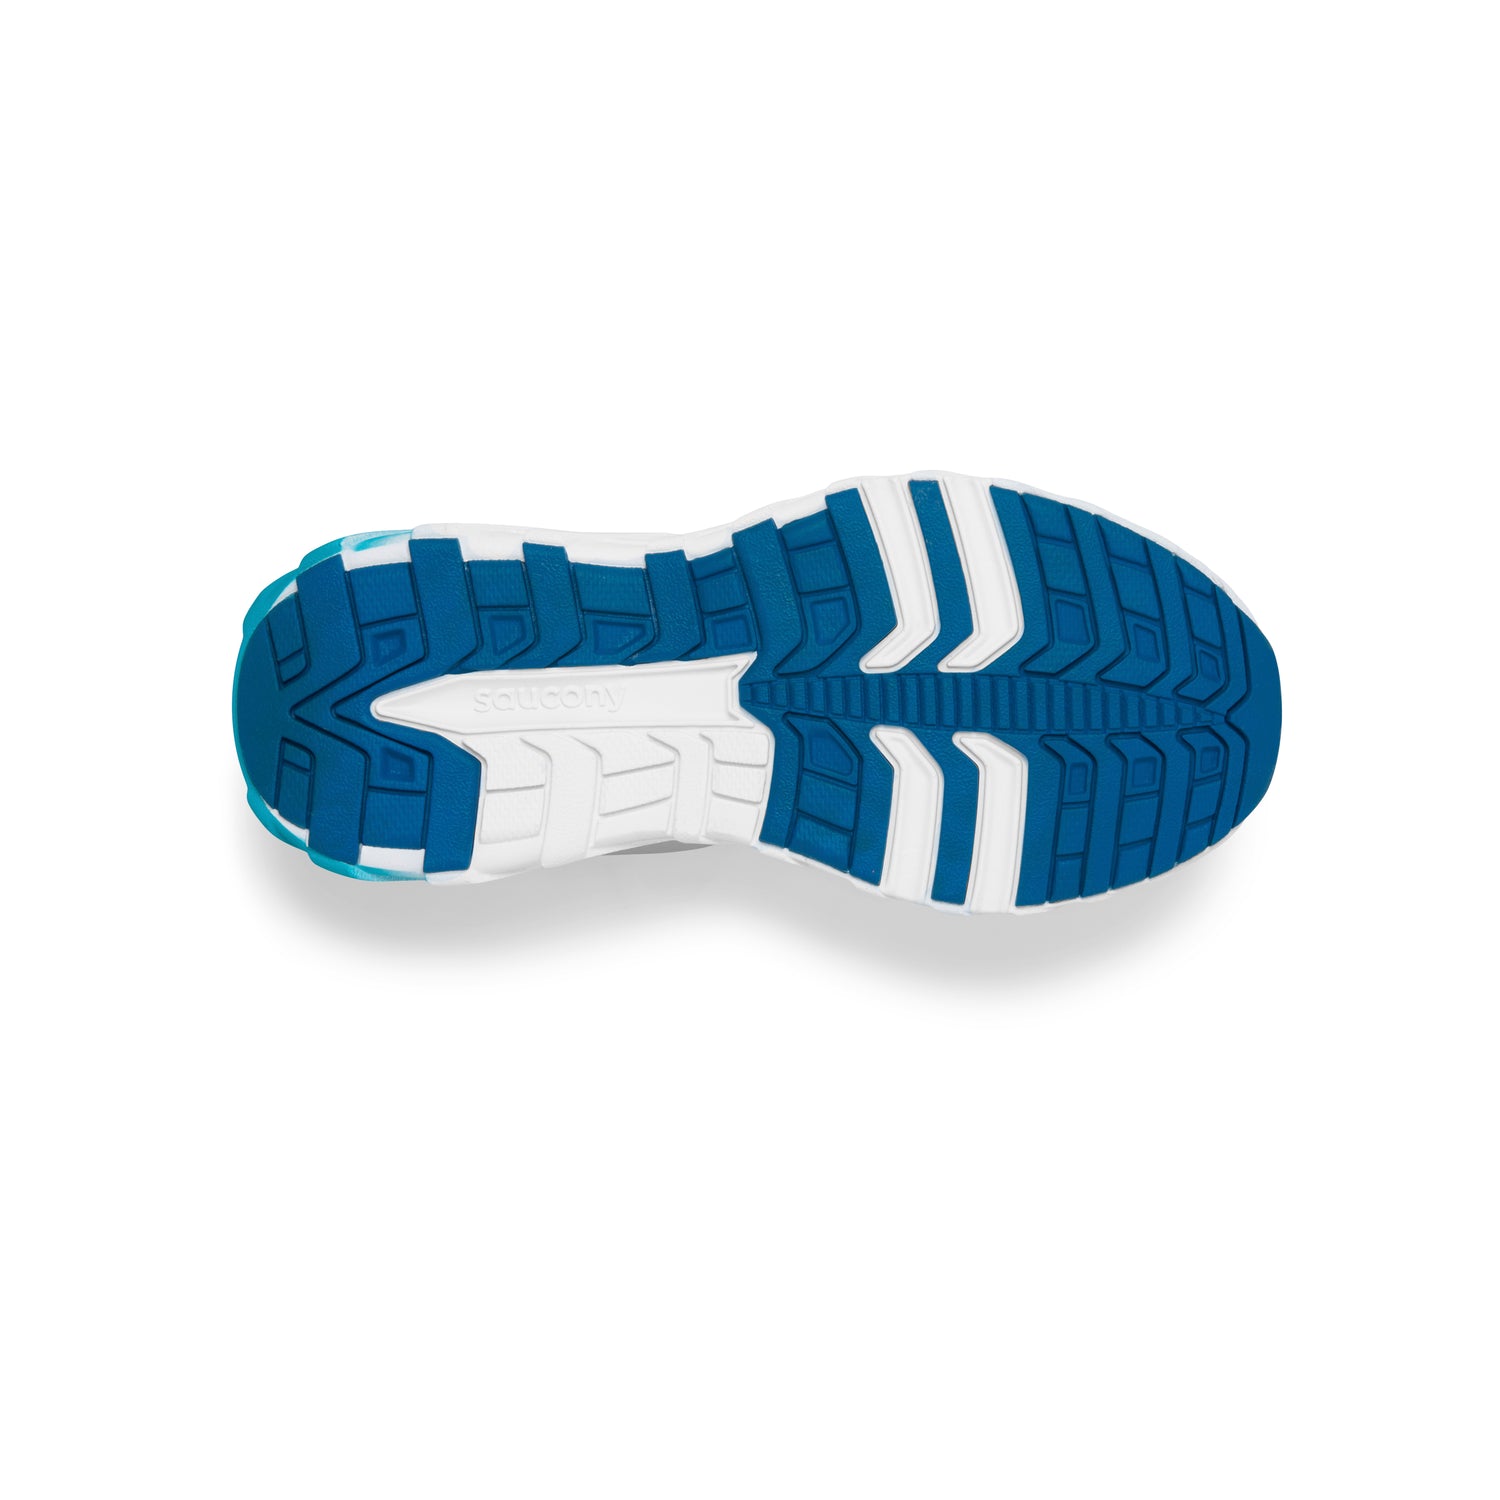 Wind A/C 2.0 Sneaker Turquoise/Silver